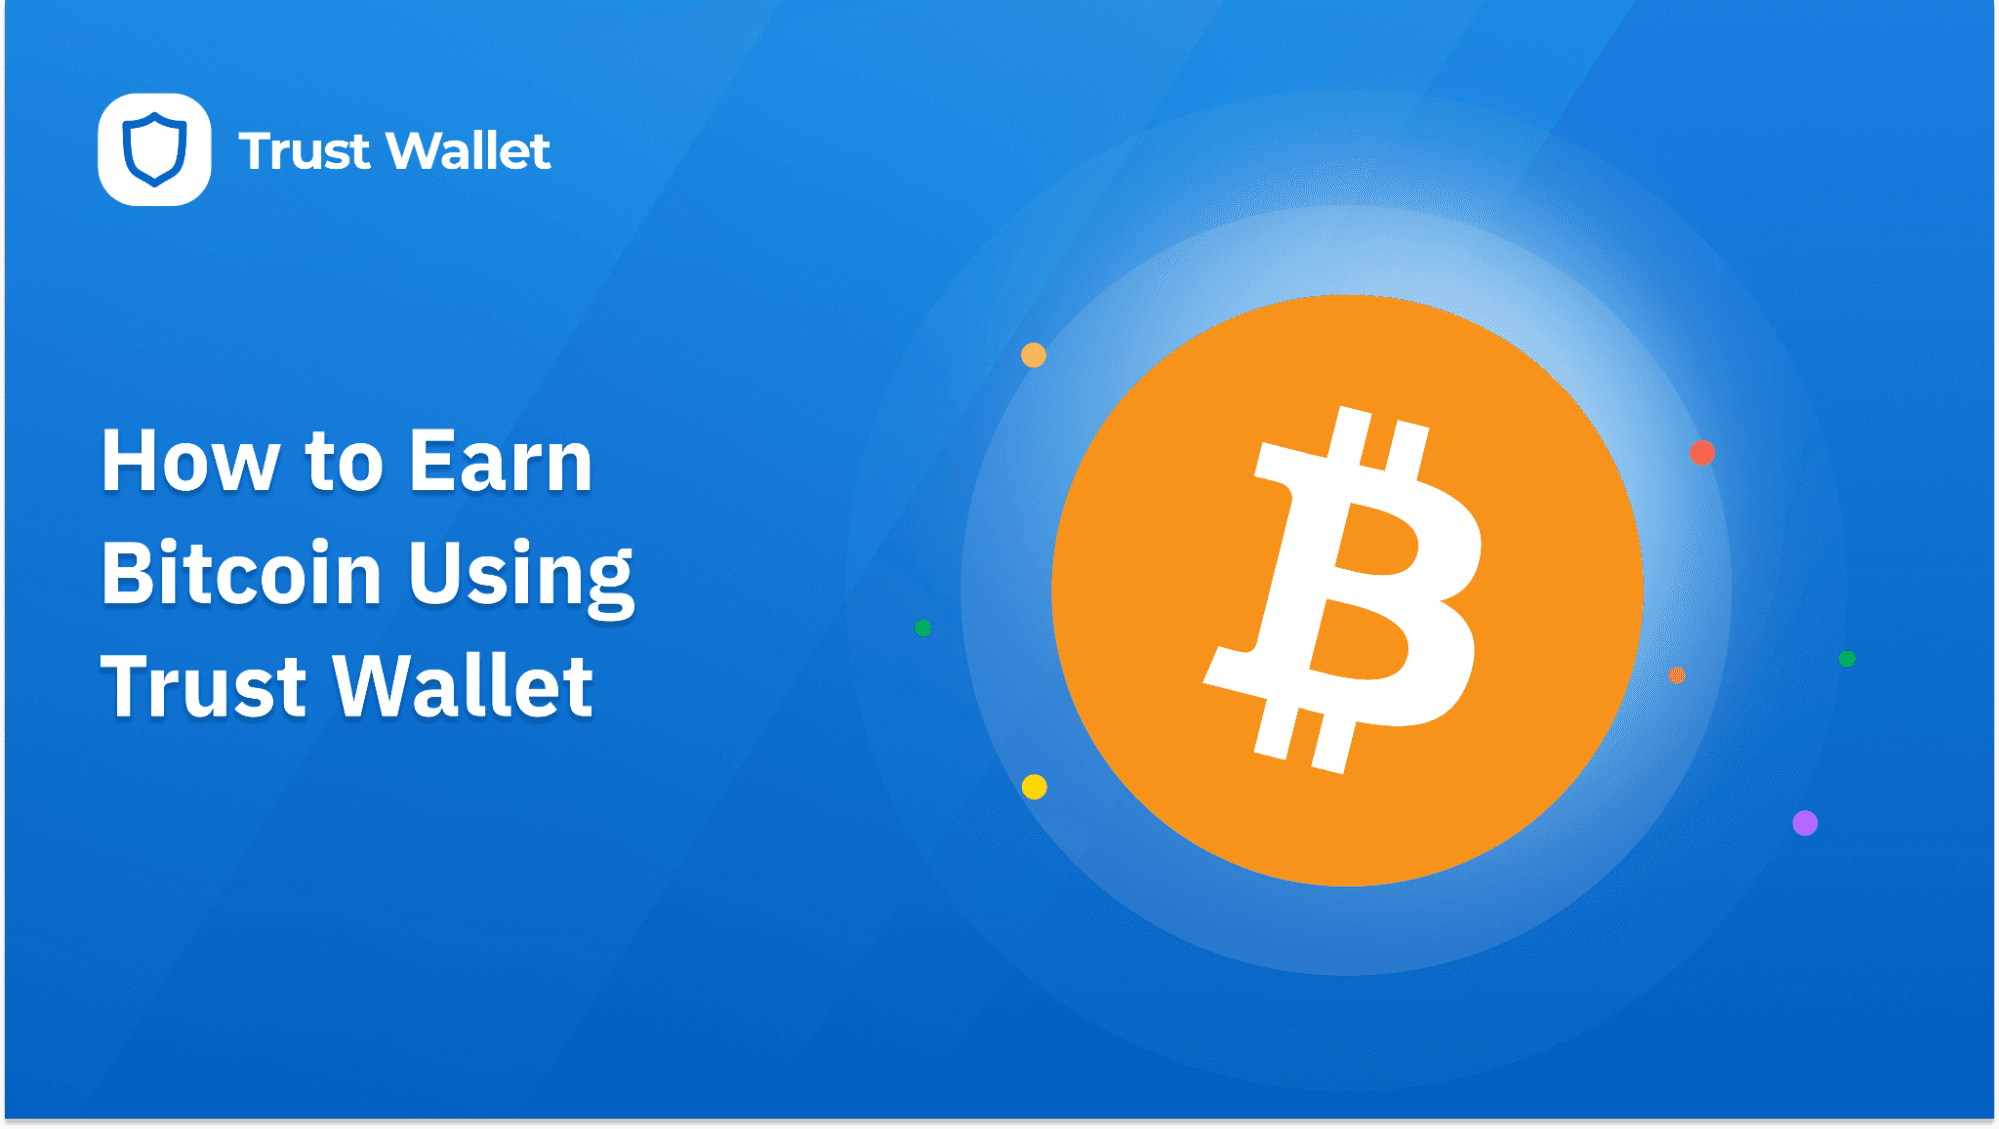 How to Earn Bitcoin Using Trust Wallet